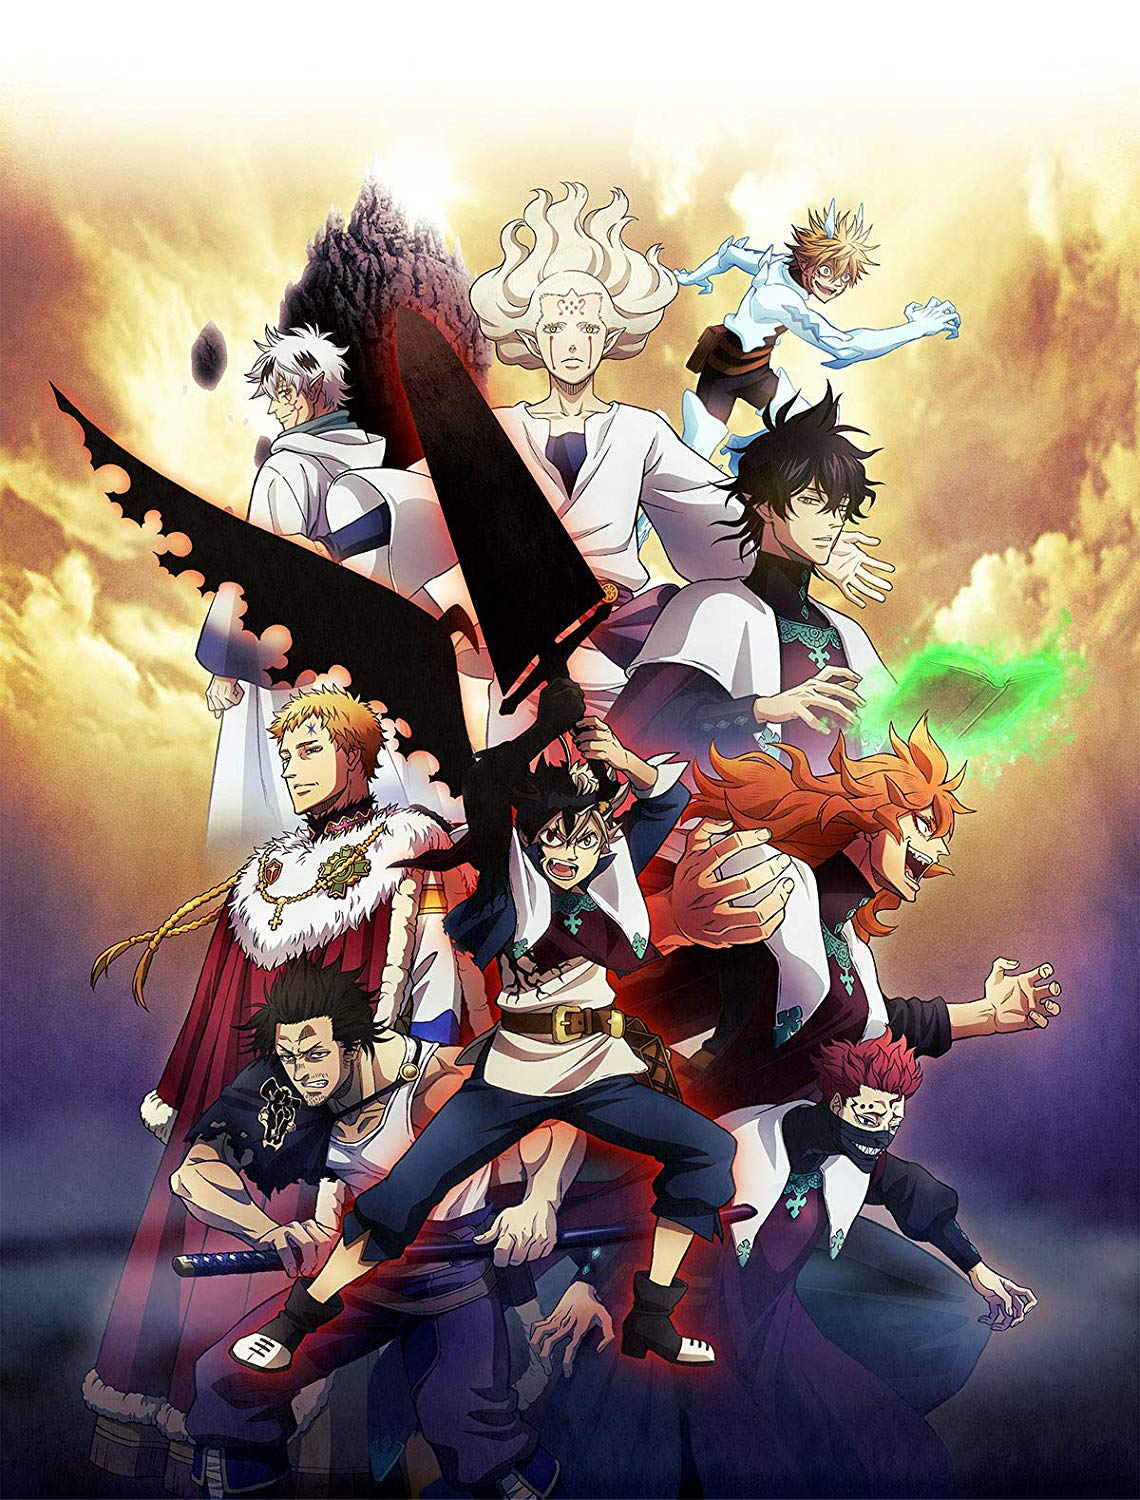 Black Clover: Ranking Every Arc From Worst To Best